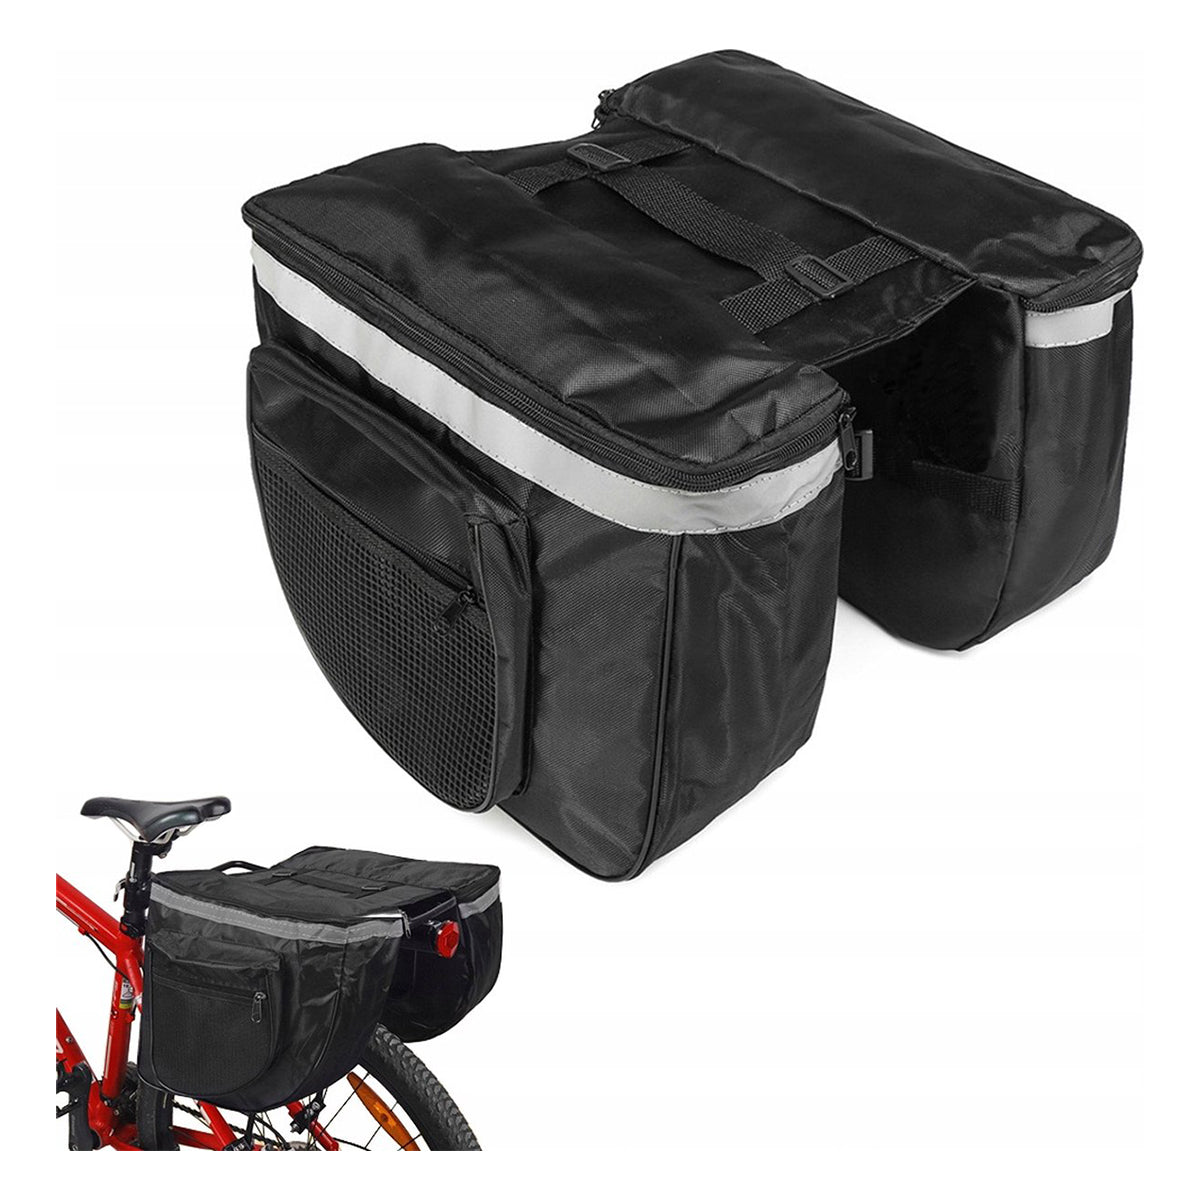 Luxury Double Luggage Carrier Bag - Bicycle Bag - Large Double Detachable Luggage Carrier Pannier - Trunkbag - Waterproof - Bikepacking Bag Holder - Trunkbag With 4 Compartments - 28 Liter Storage Space - Black